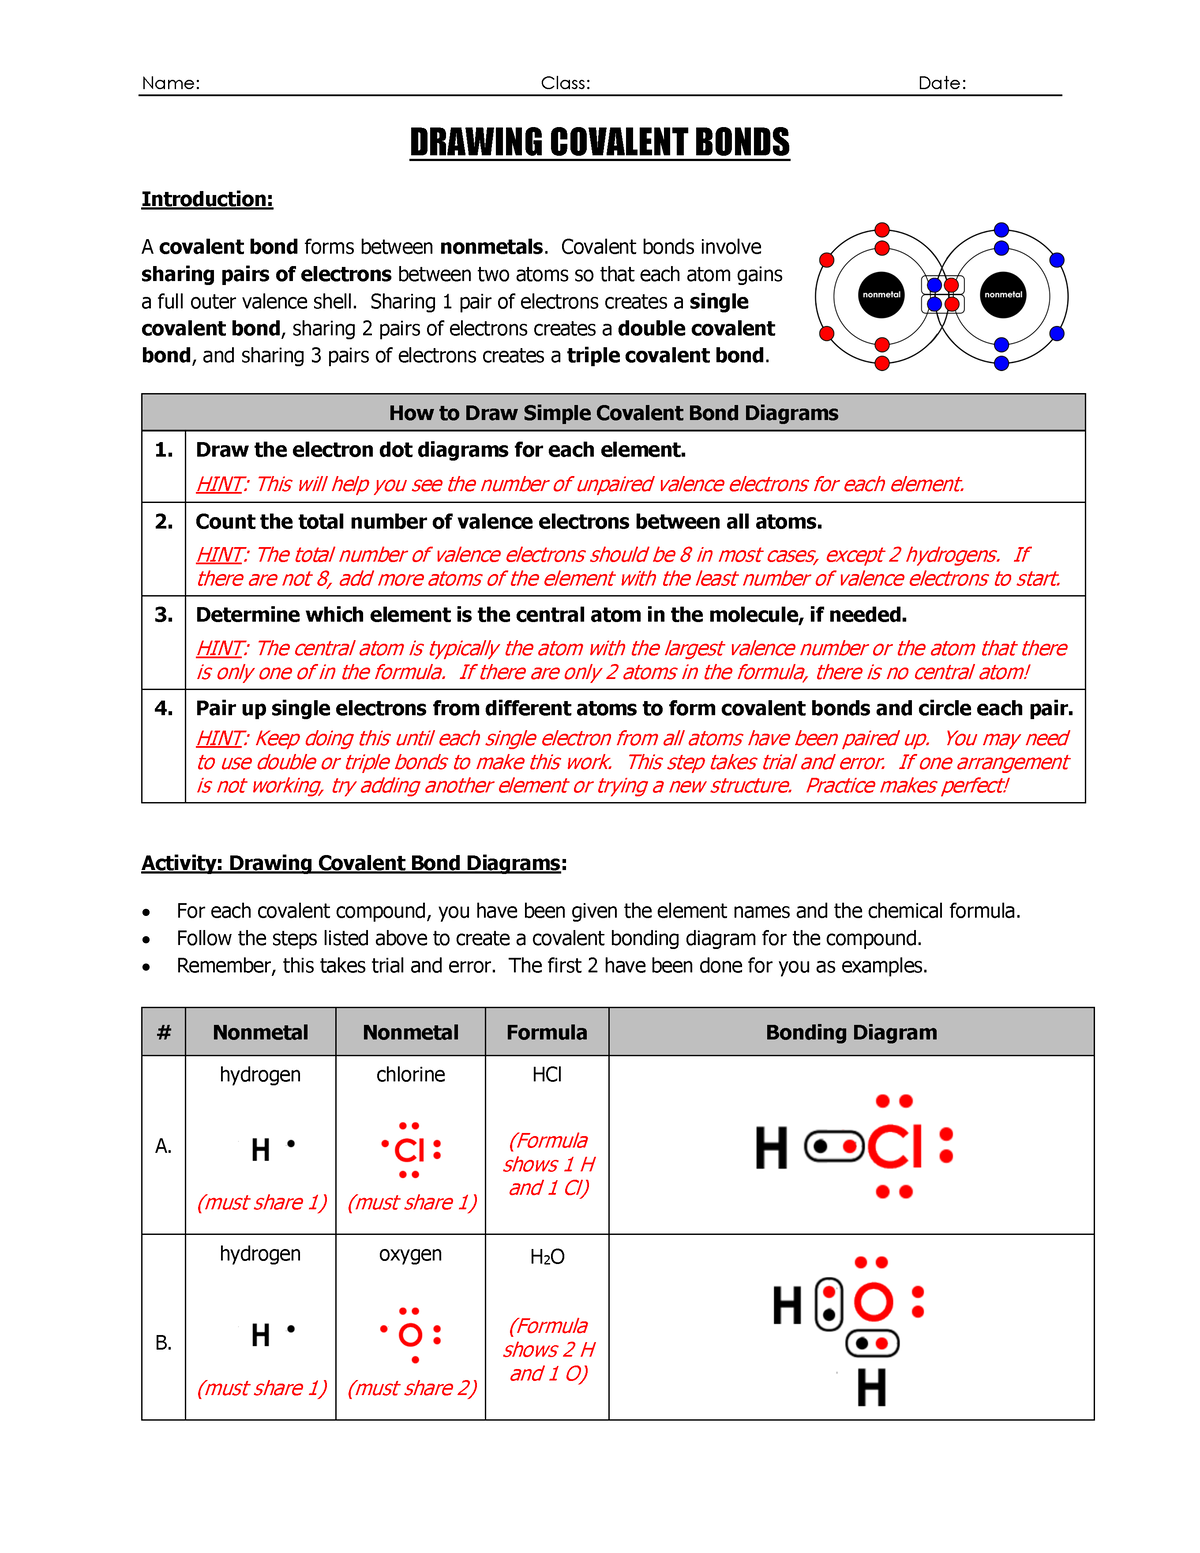 WS Drawing Covalent Bond Diagrams PDF Name Class Date DRAWING